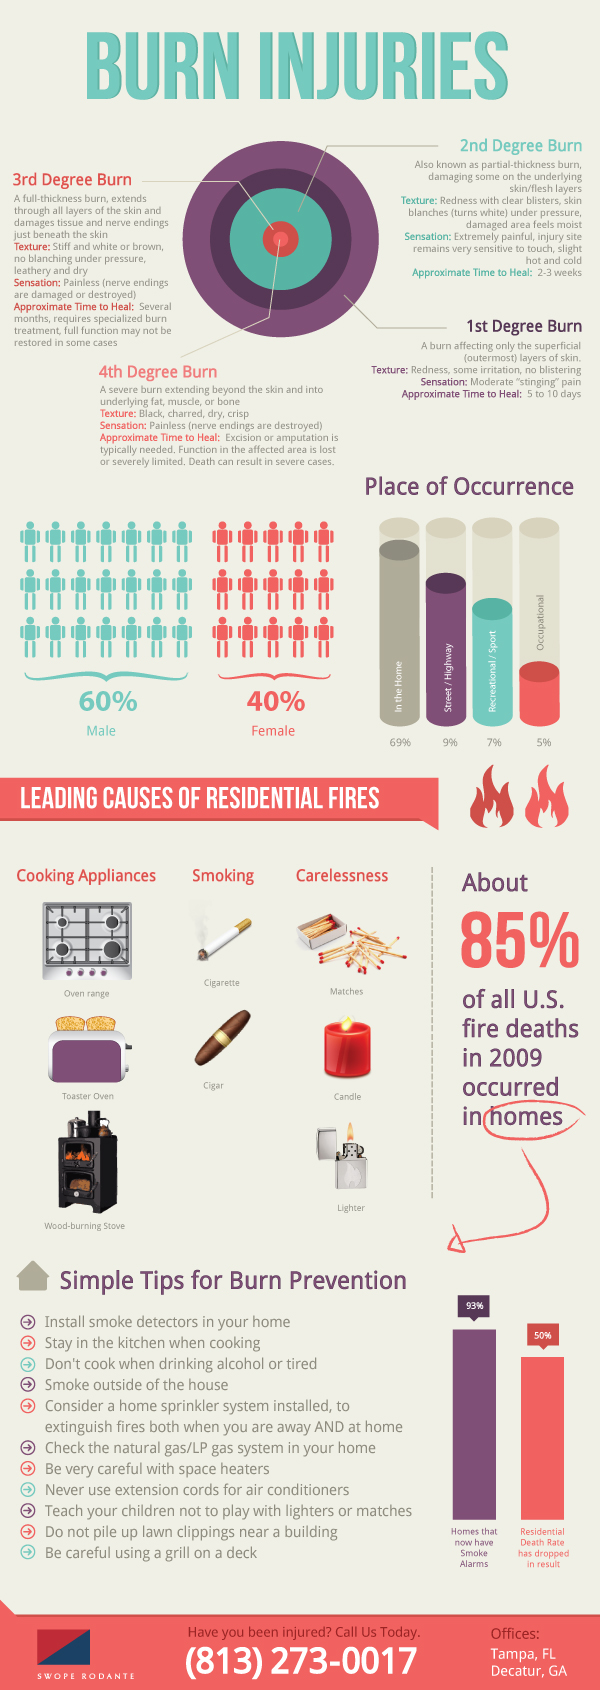 Different Types of Burn Injuries